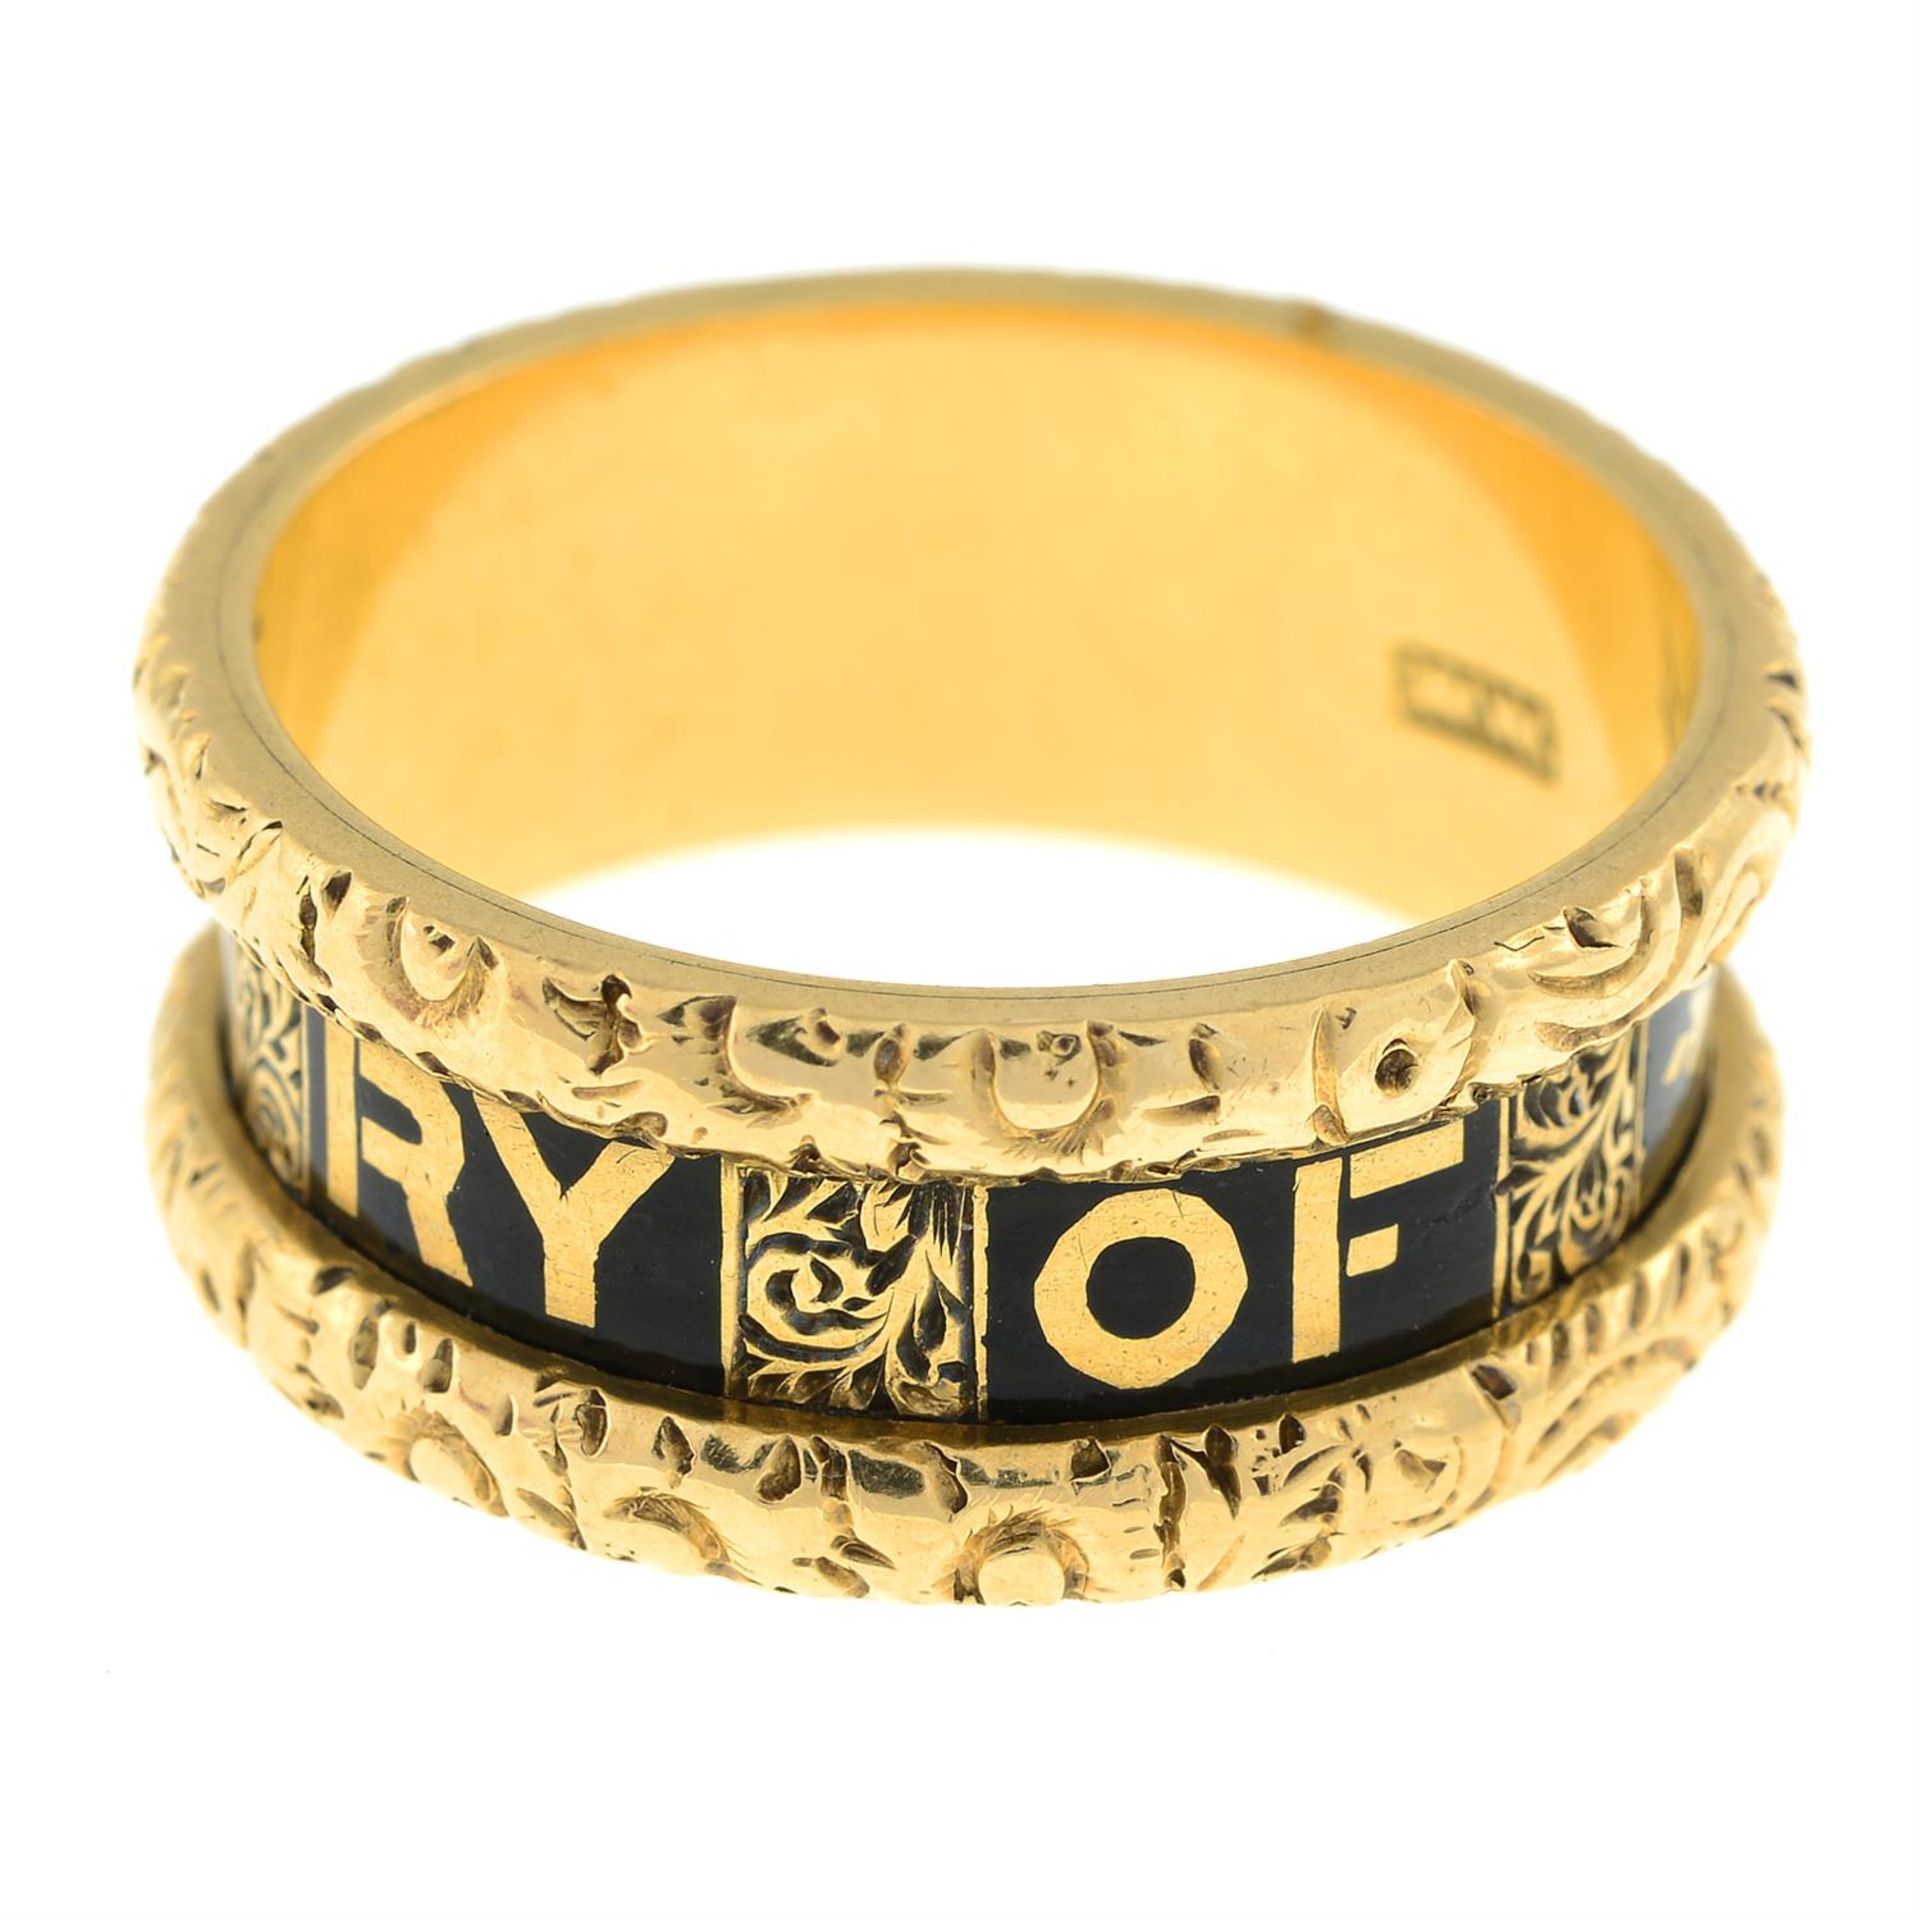 A late Victorian 18ct gold mourning ring, with black enamel 'In Memory Of' script and floral border. - Image 3 of 5